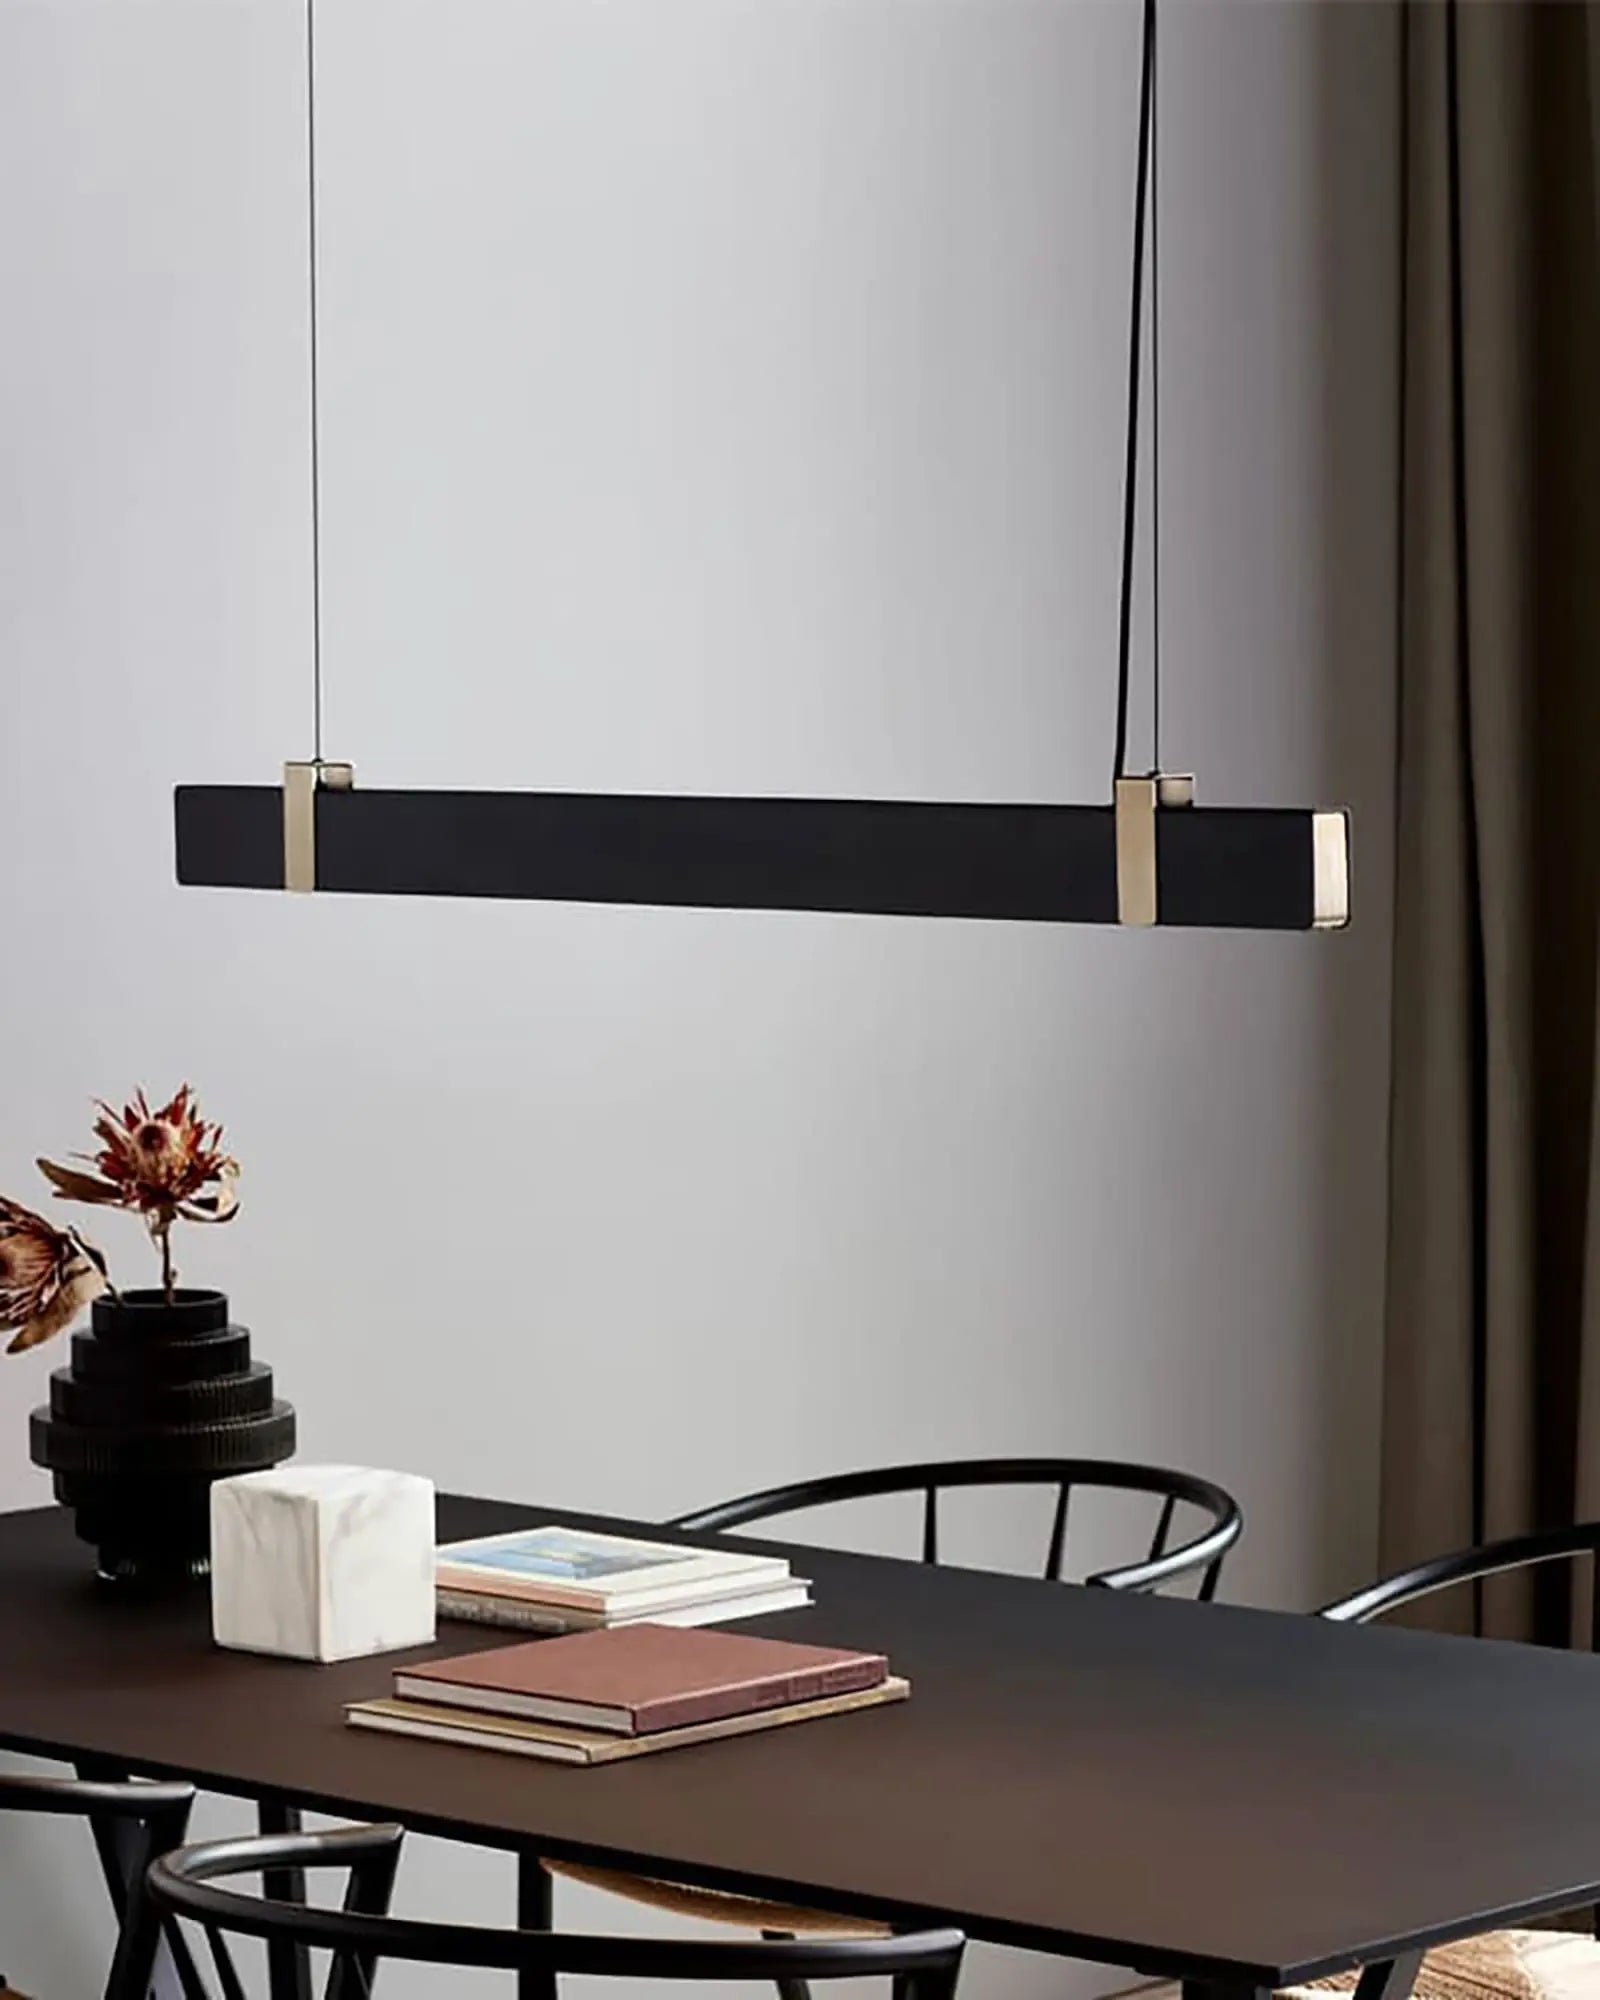 Lilt Scandinavian contemporary linear pendant light in black and brass above dining table